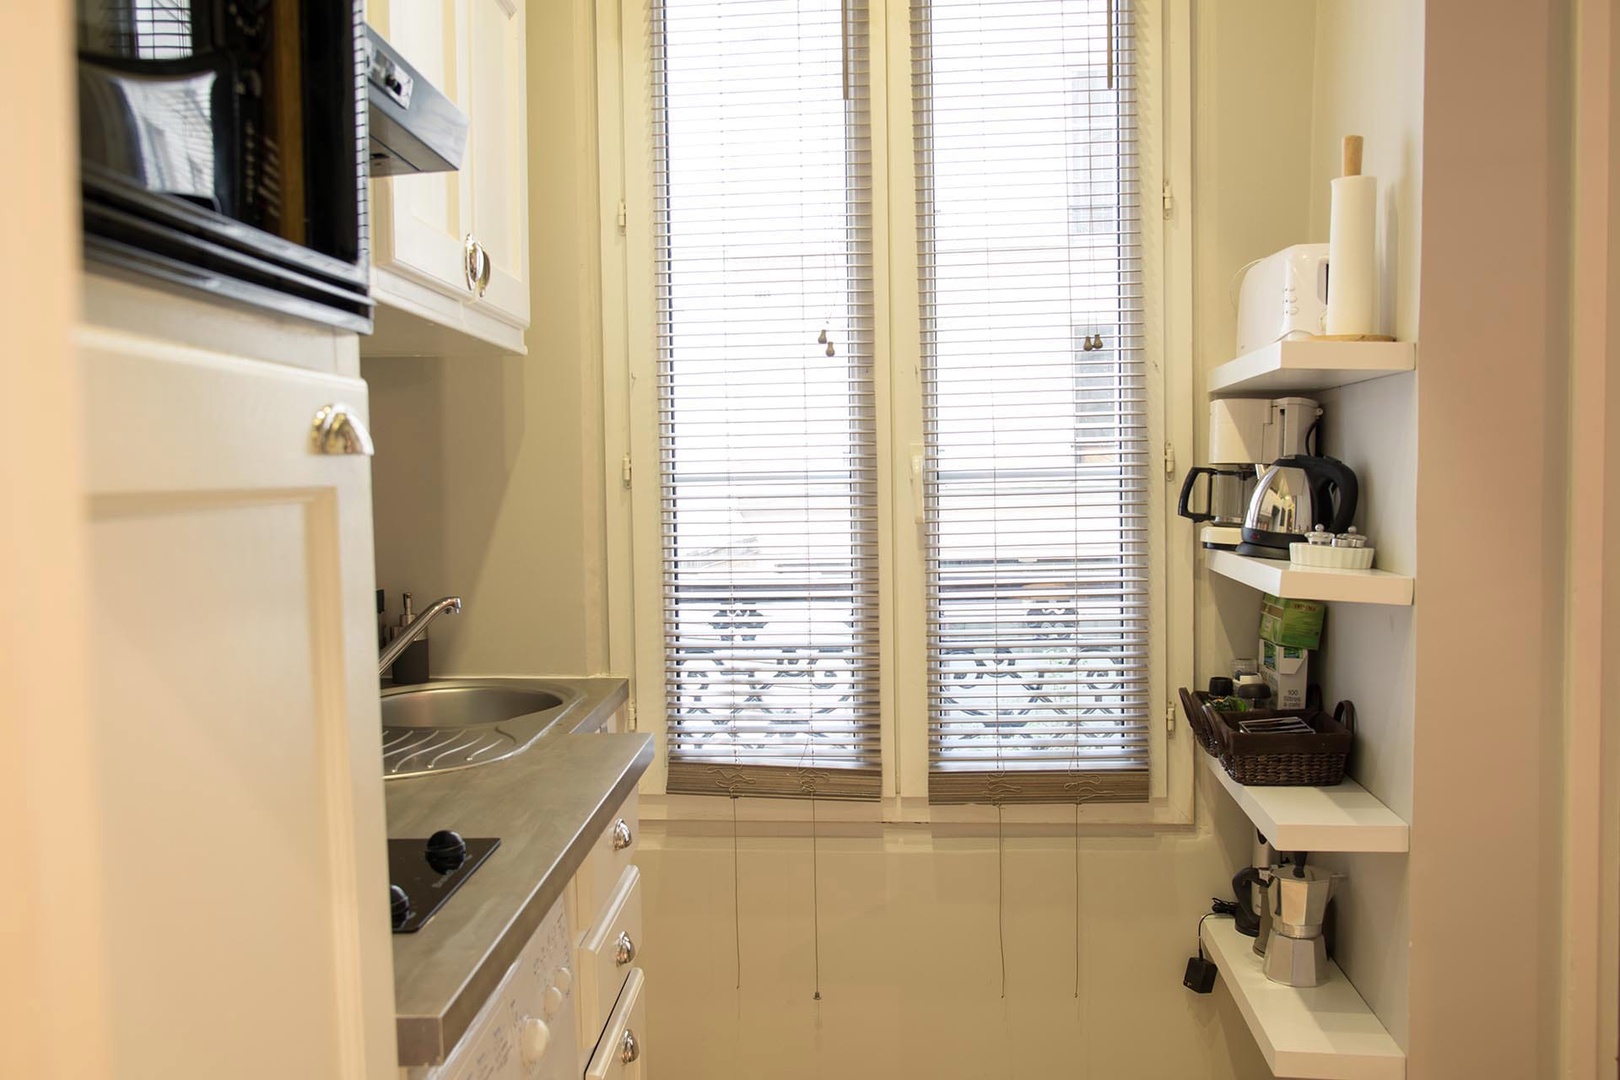 A lofty window adds extra natural light to the kitchenette.